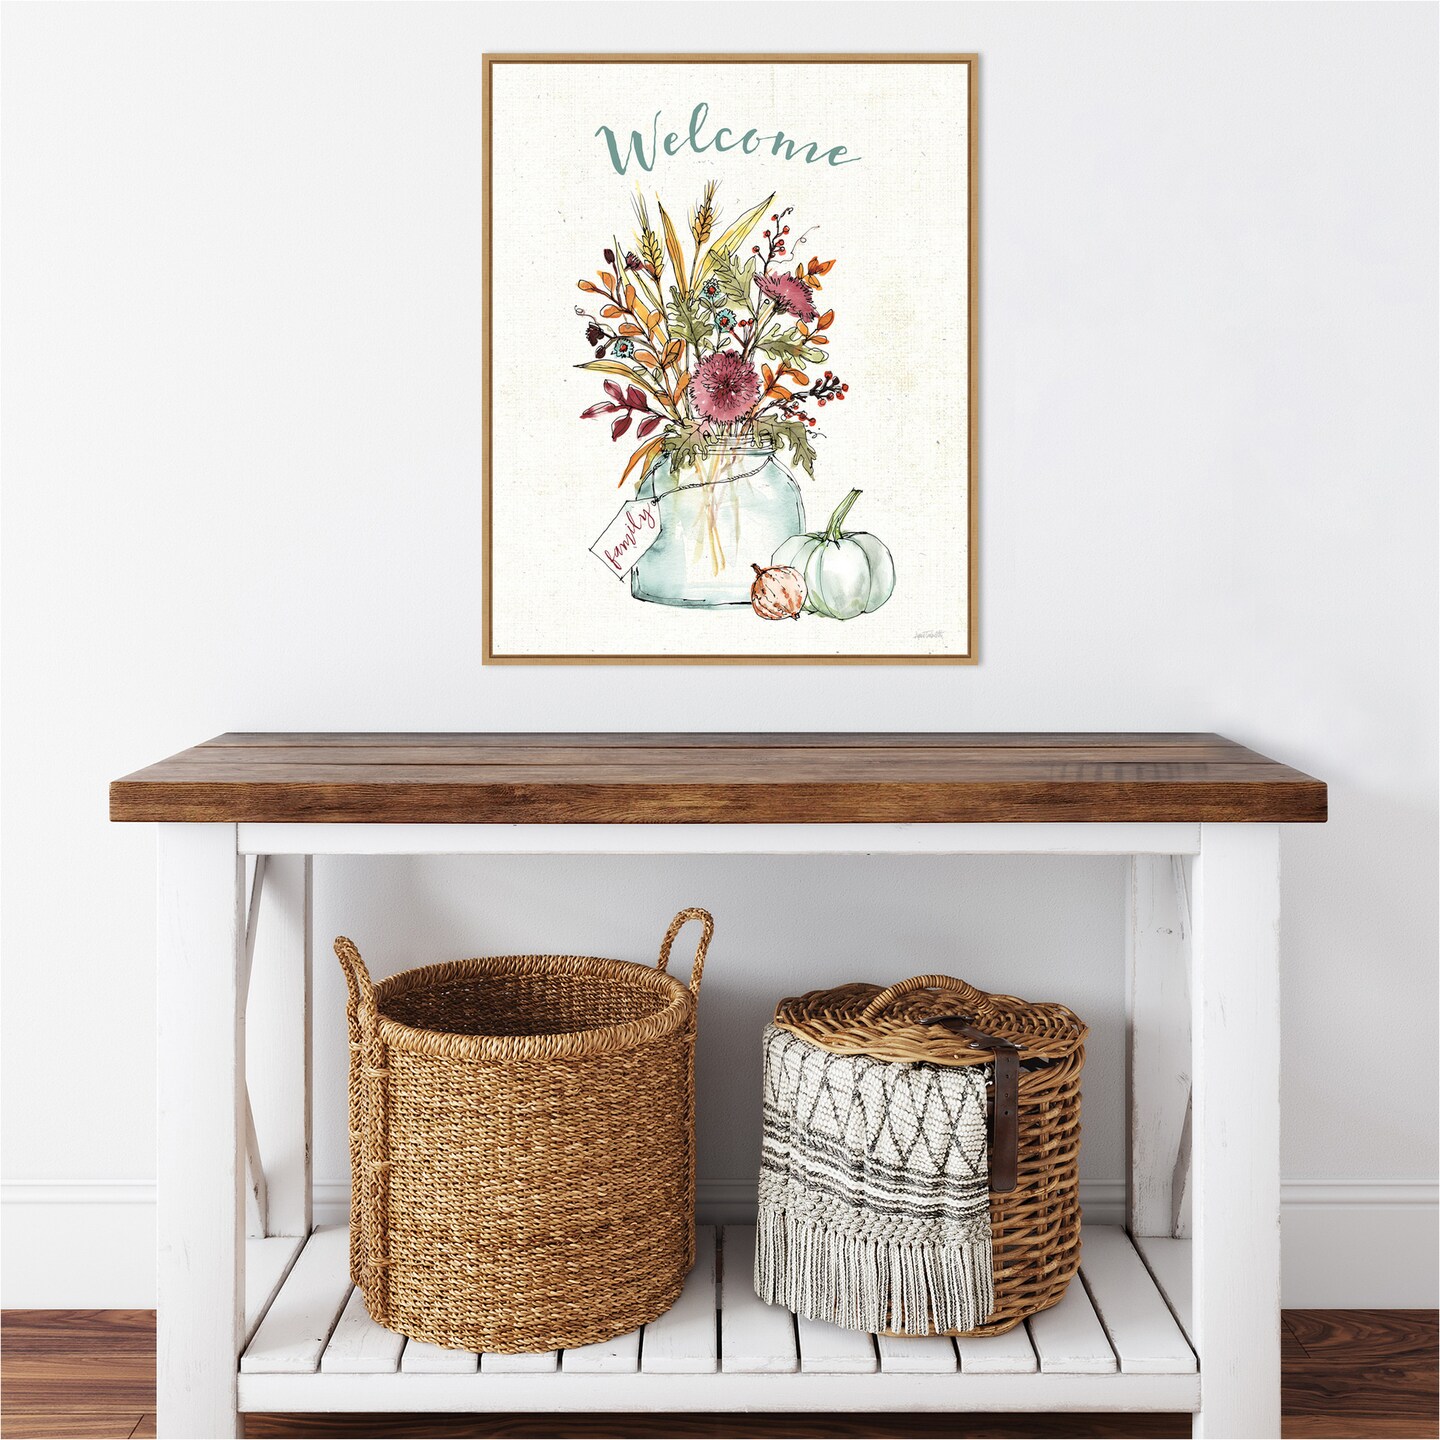 Festive Foliage III Welcome by Anne Tavoletti 23-in. W x 28-in. H. Canvas Wall Art Print Framed in Natural